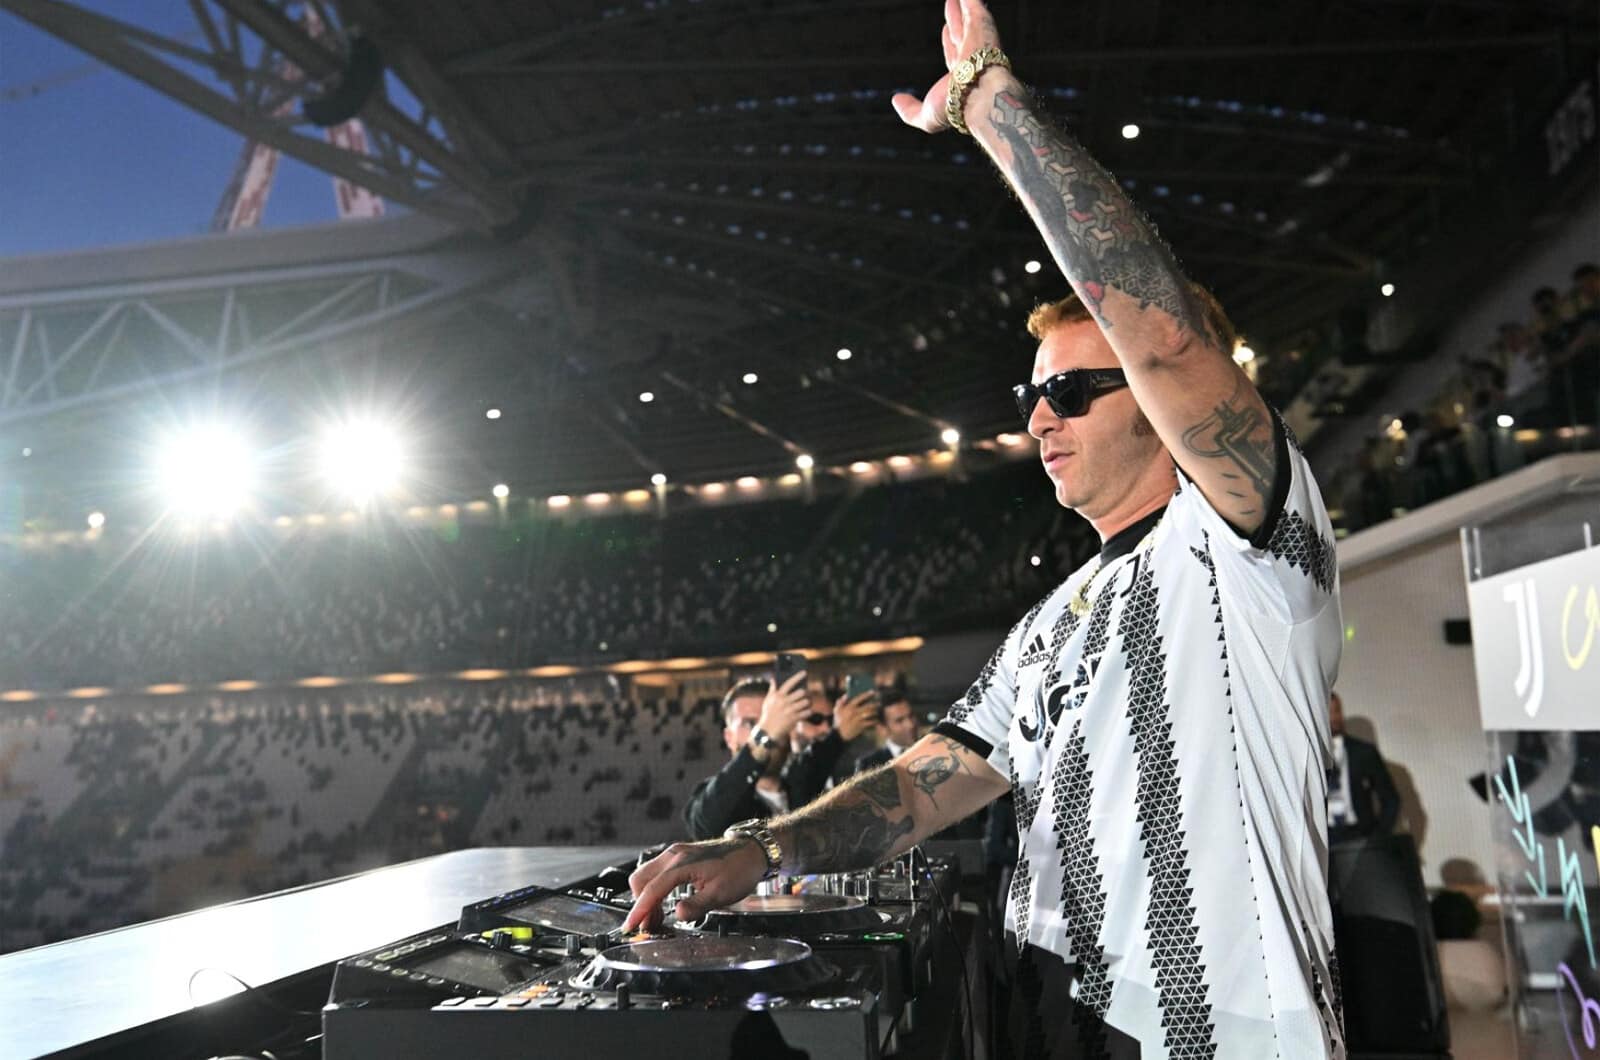 Will DJ sets at Serie A stadiums become a habit?